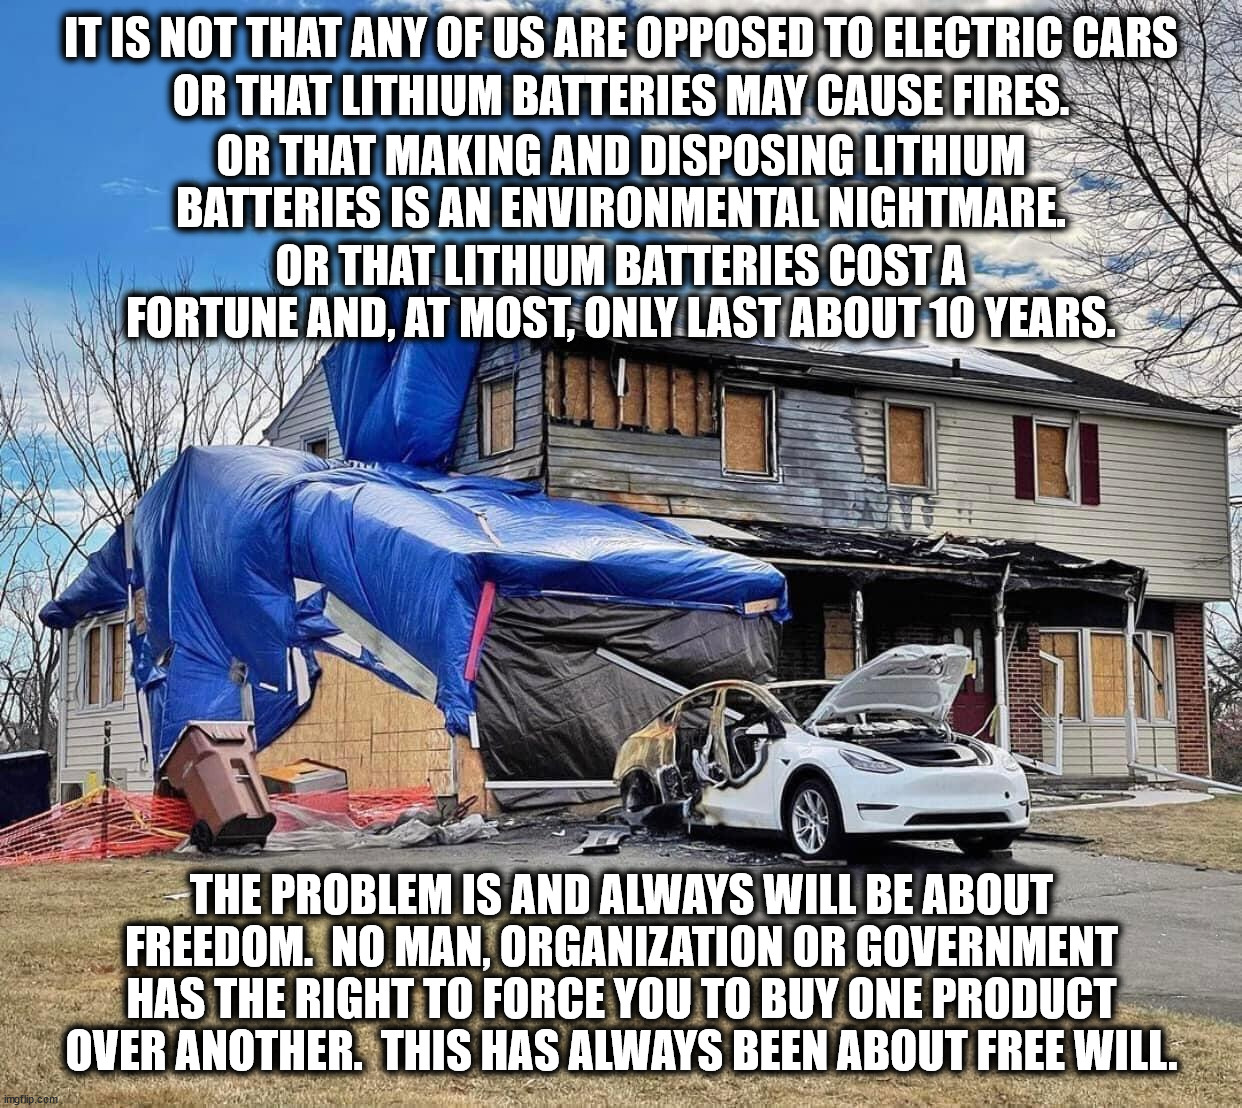 Climate change was invented by governments to control people. It was never about saving the planet. | IT IS NOT THAT ANY OF US ARE OPPOSED TO ELECTRIC CARS; OR THAT LITHIUM BATTERIES MAY CAUSE FIRES. OR THAT MAKING AND DISPOSING LITHIUM BATTERIES IS AN ENVIRONMENTAL NIGHTMARE. OR THAT LITHIUM BATTERIES COST A FORTUNE AND, AT MOST, ONLY LAST ABOUT 10 YEARS. THE PROBLEM IS AND ALWAYS WILL BE ABOUT FREEDOM.  NO MAN, ORGANIZATION OR GOVERNMENT HAS THE RIGHT TO FORCE YOU TO BUY ONE PRODUCT OVER ANOTHER.  THIS HAS ALWAYS BEEN ABOUT FREE WILL. | image tagged in just say no to agenda 21,no to agenda 2030,no to the great reset,no to build back better,no to green new deal,no to slavery | made w/ Imgflip meme maker